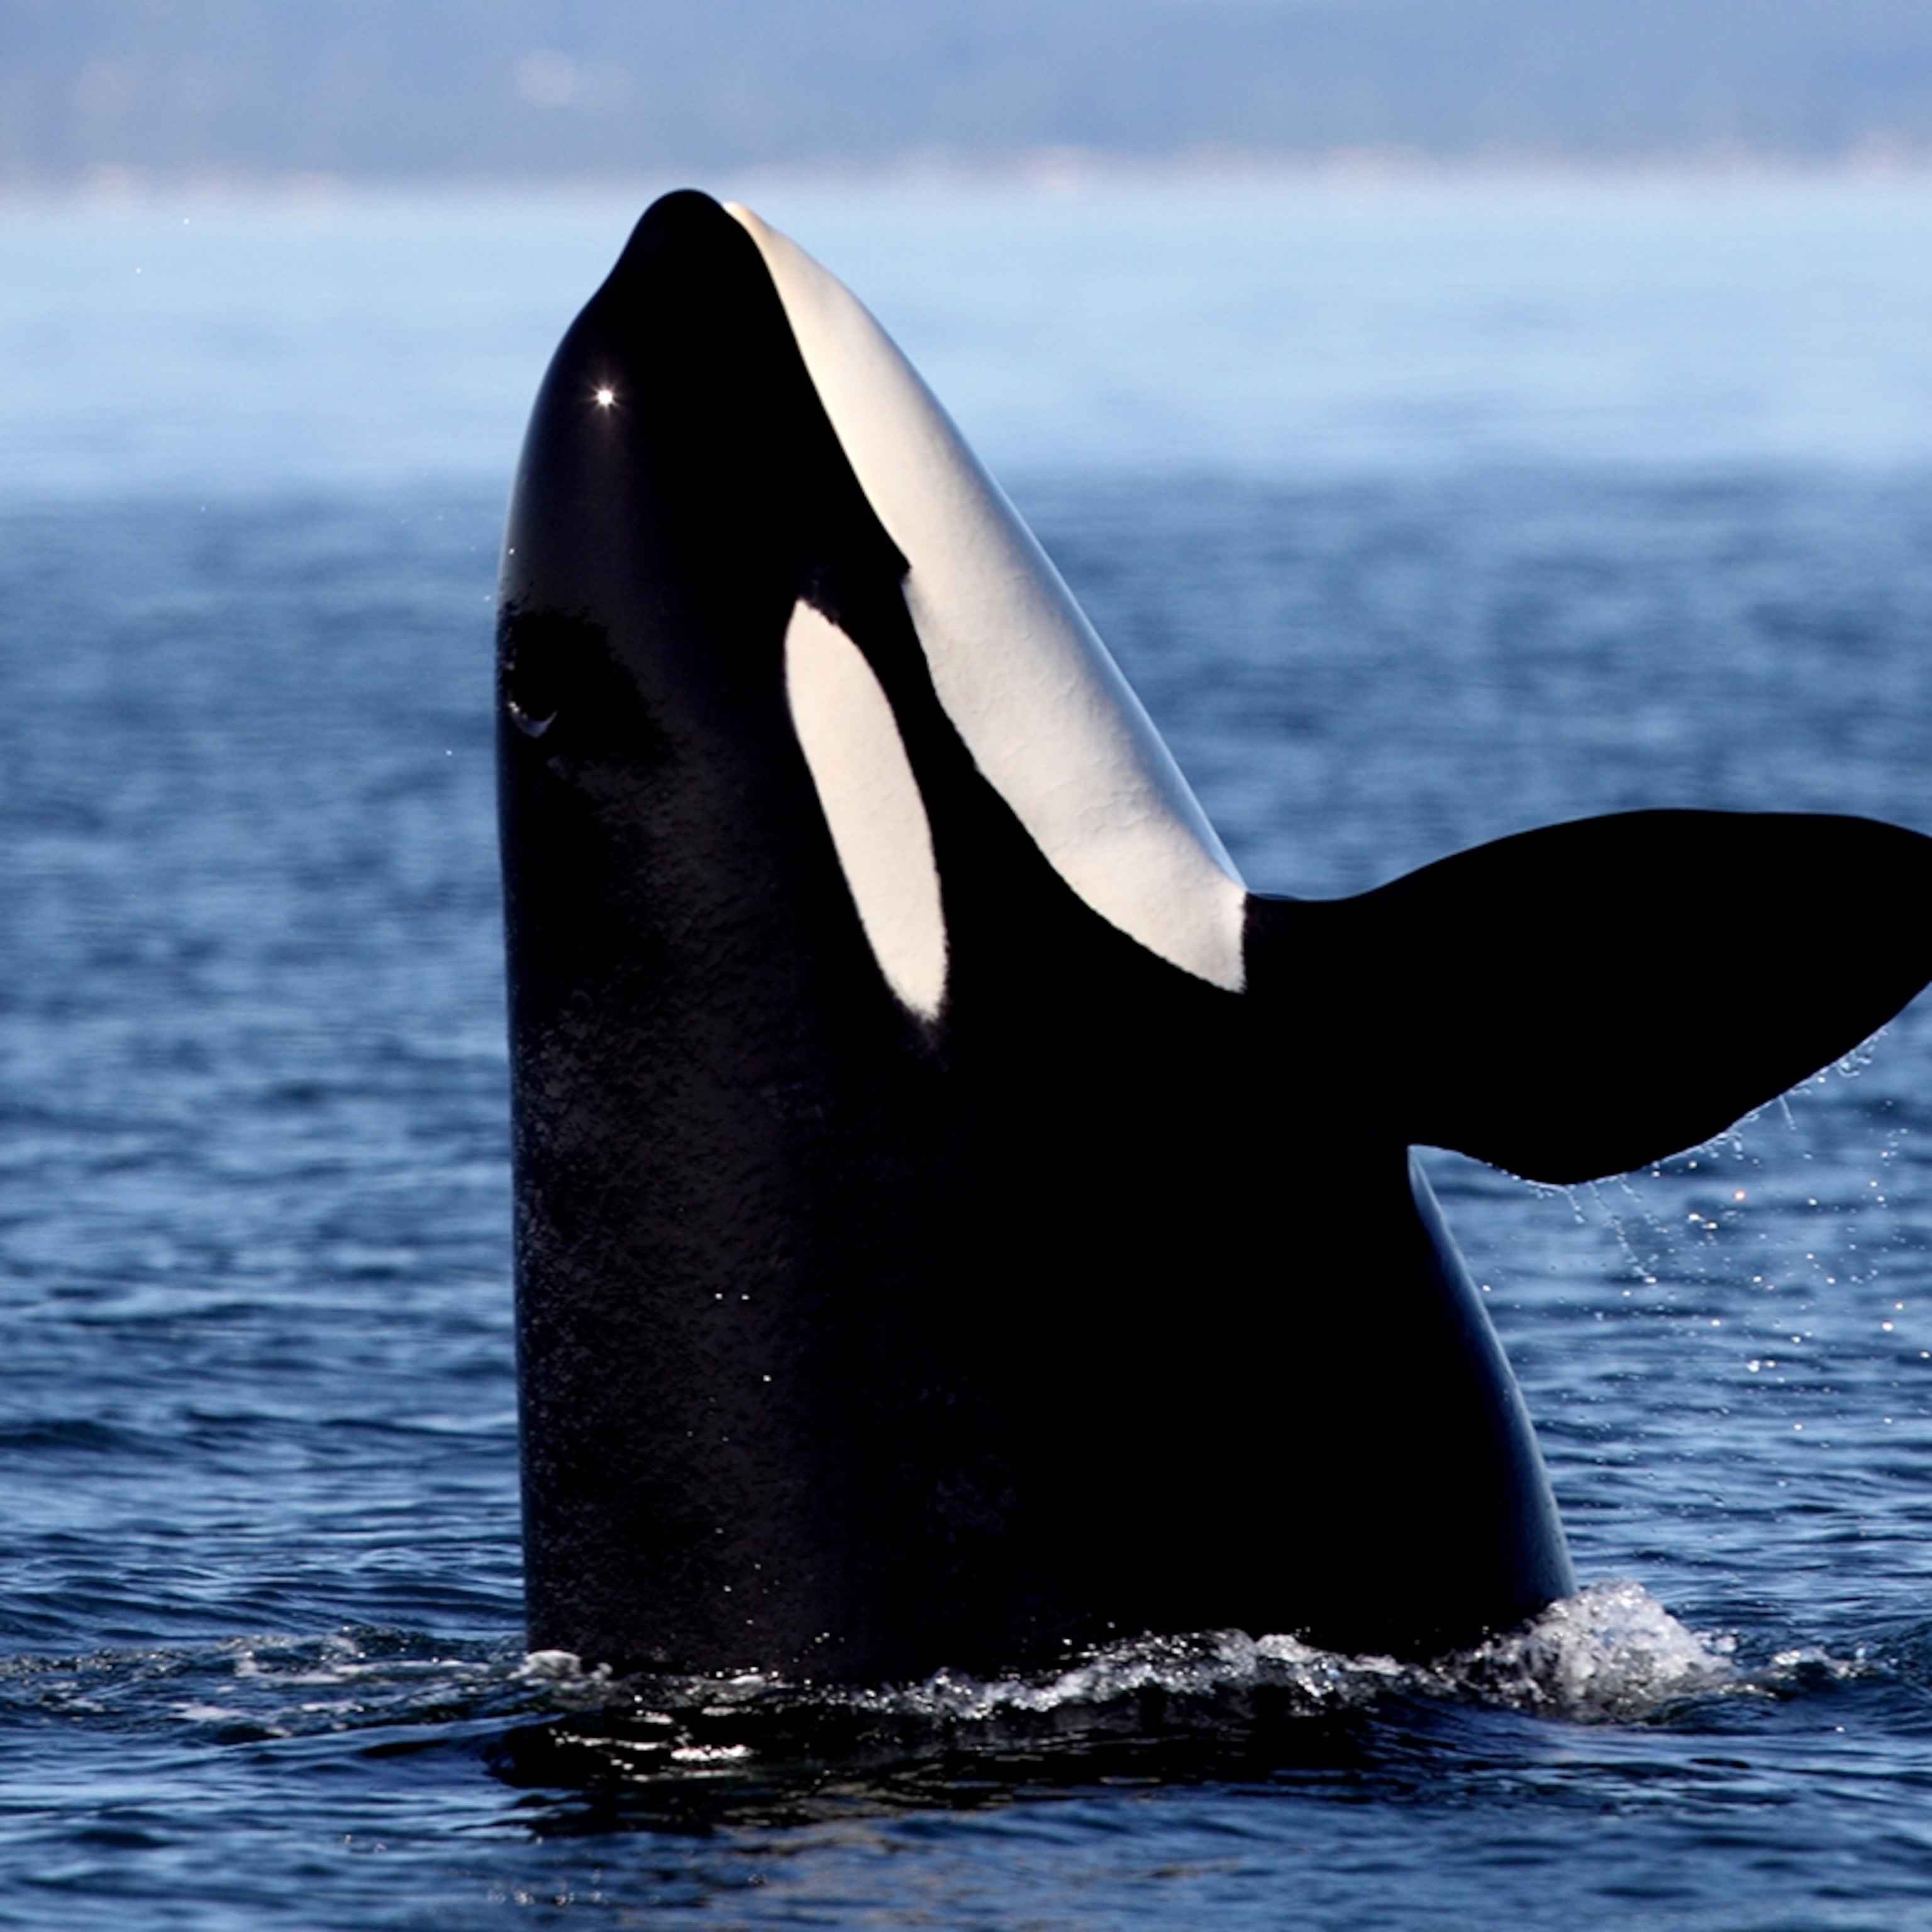 Detail Picture Of An Orca Whale Nomer 32